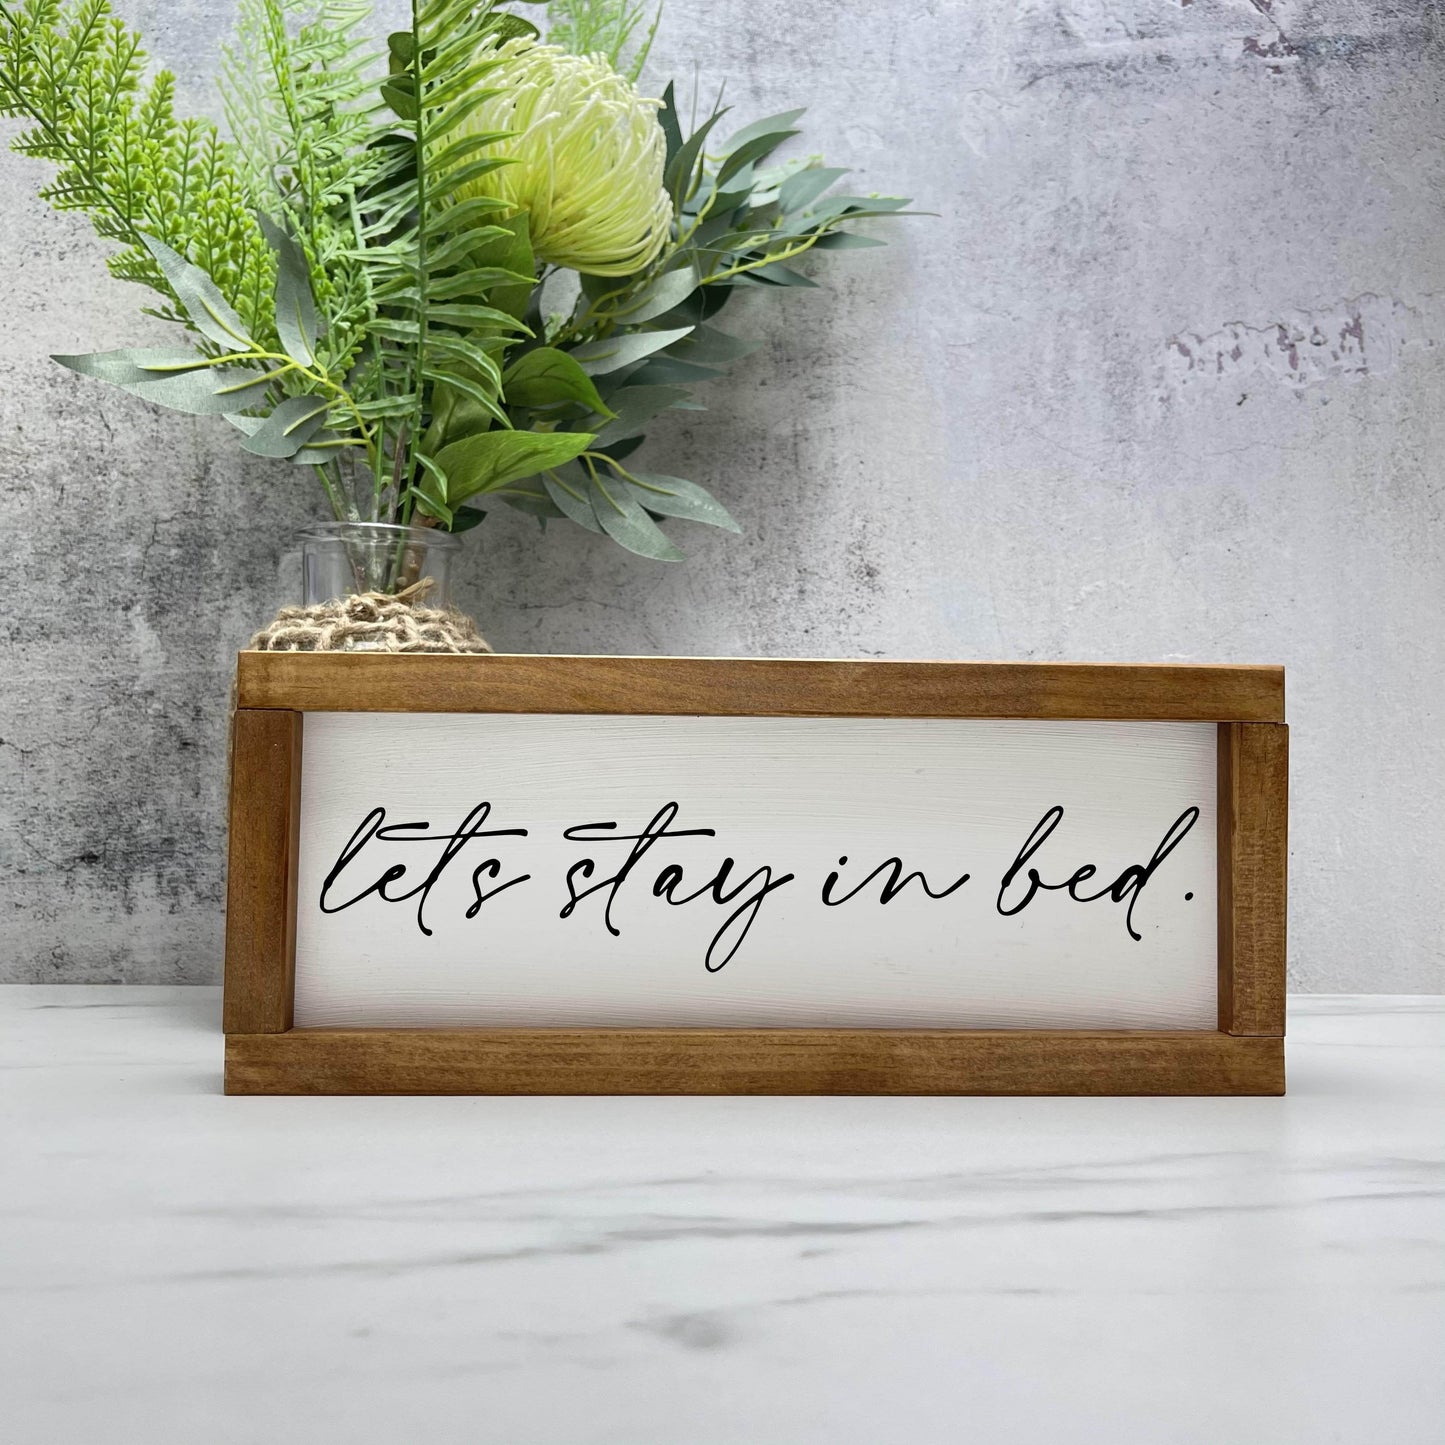 Let's stay in bed framed wood sign, love sign, couples gift sign, quote sign, home decor